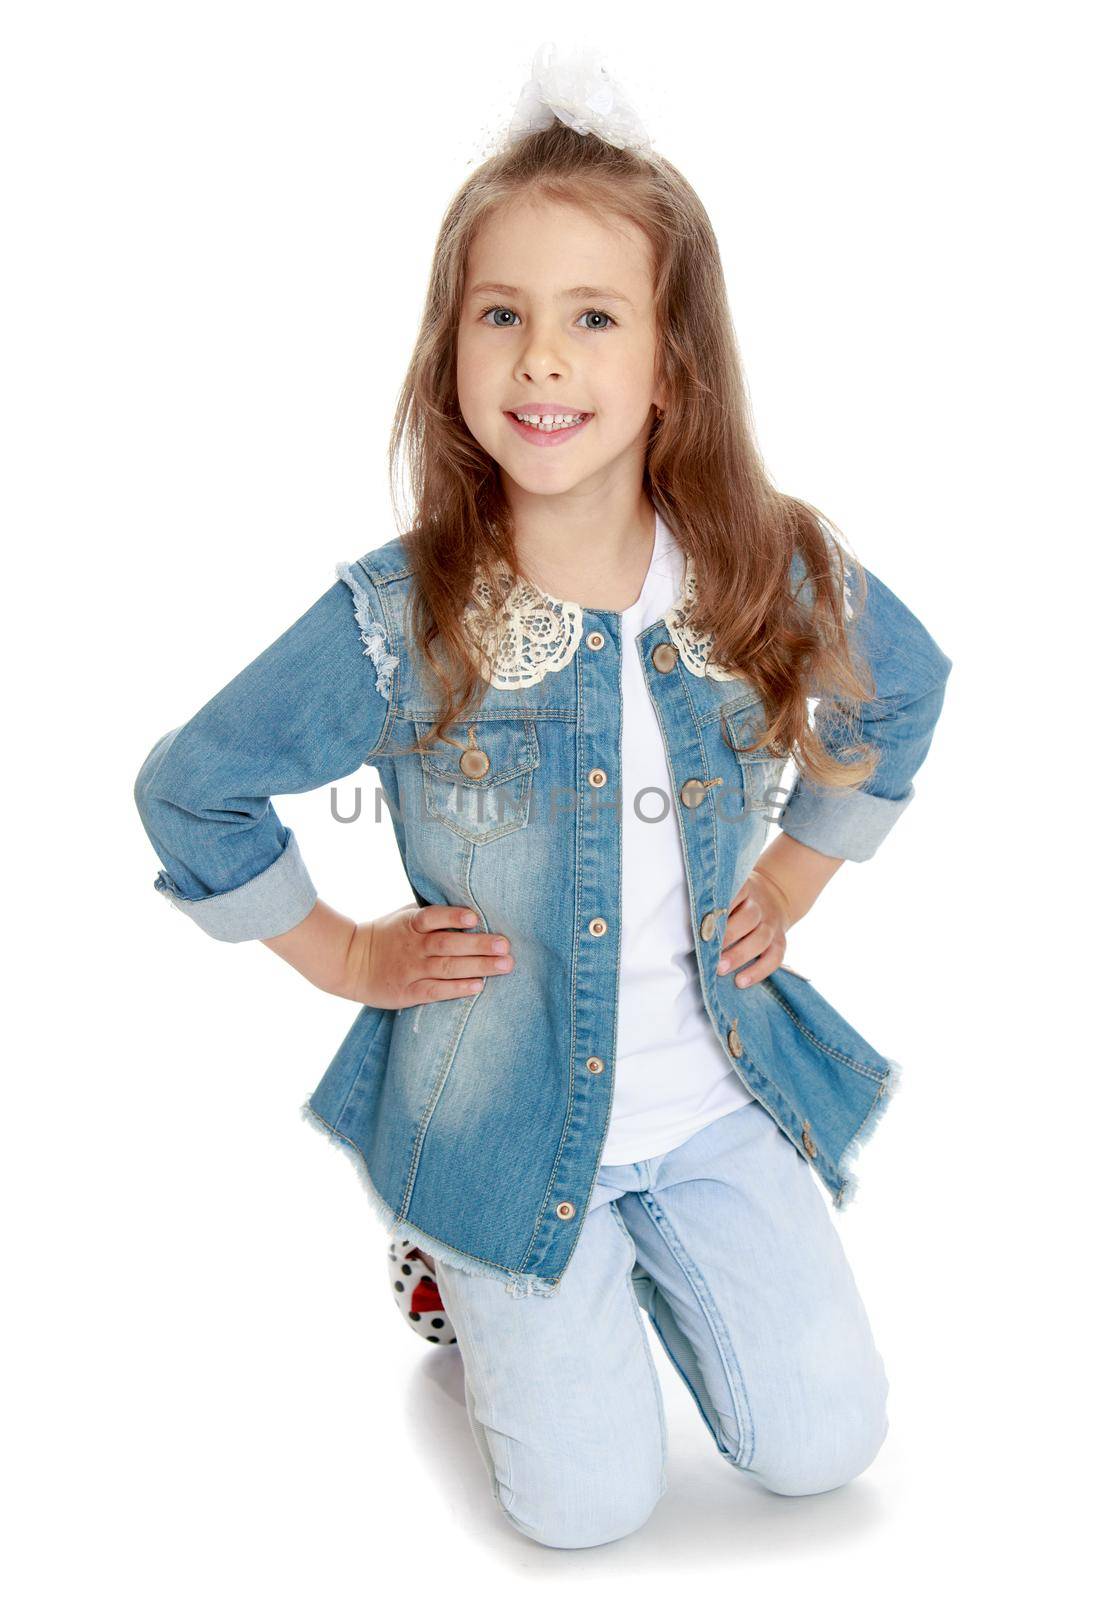 Nice little girl in denim suit. The girl kneeling on the floor. She smiles sweetly at the camera - Isolated on white background